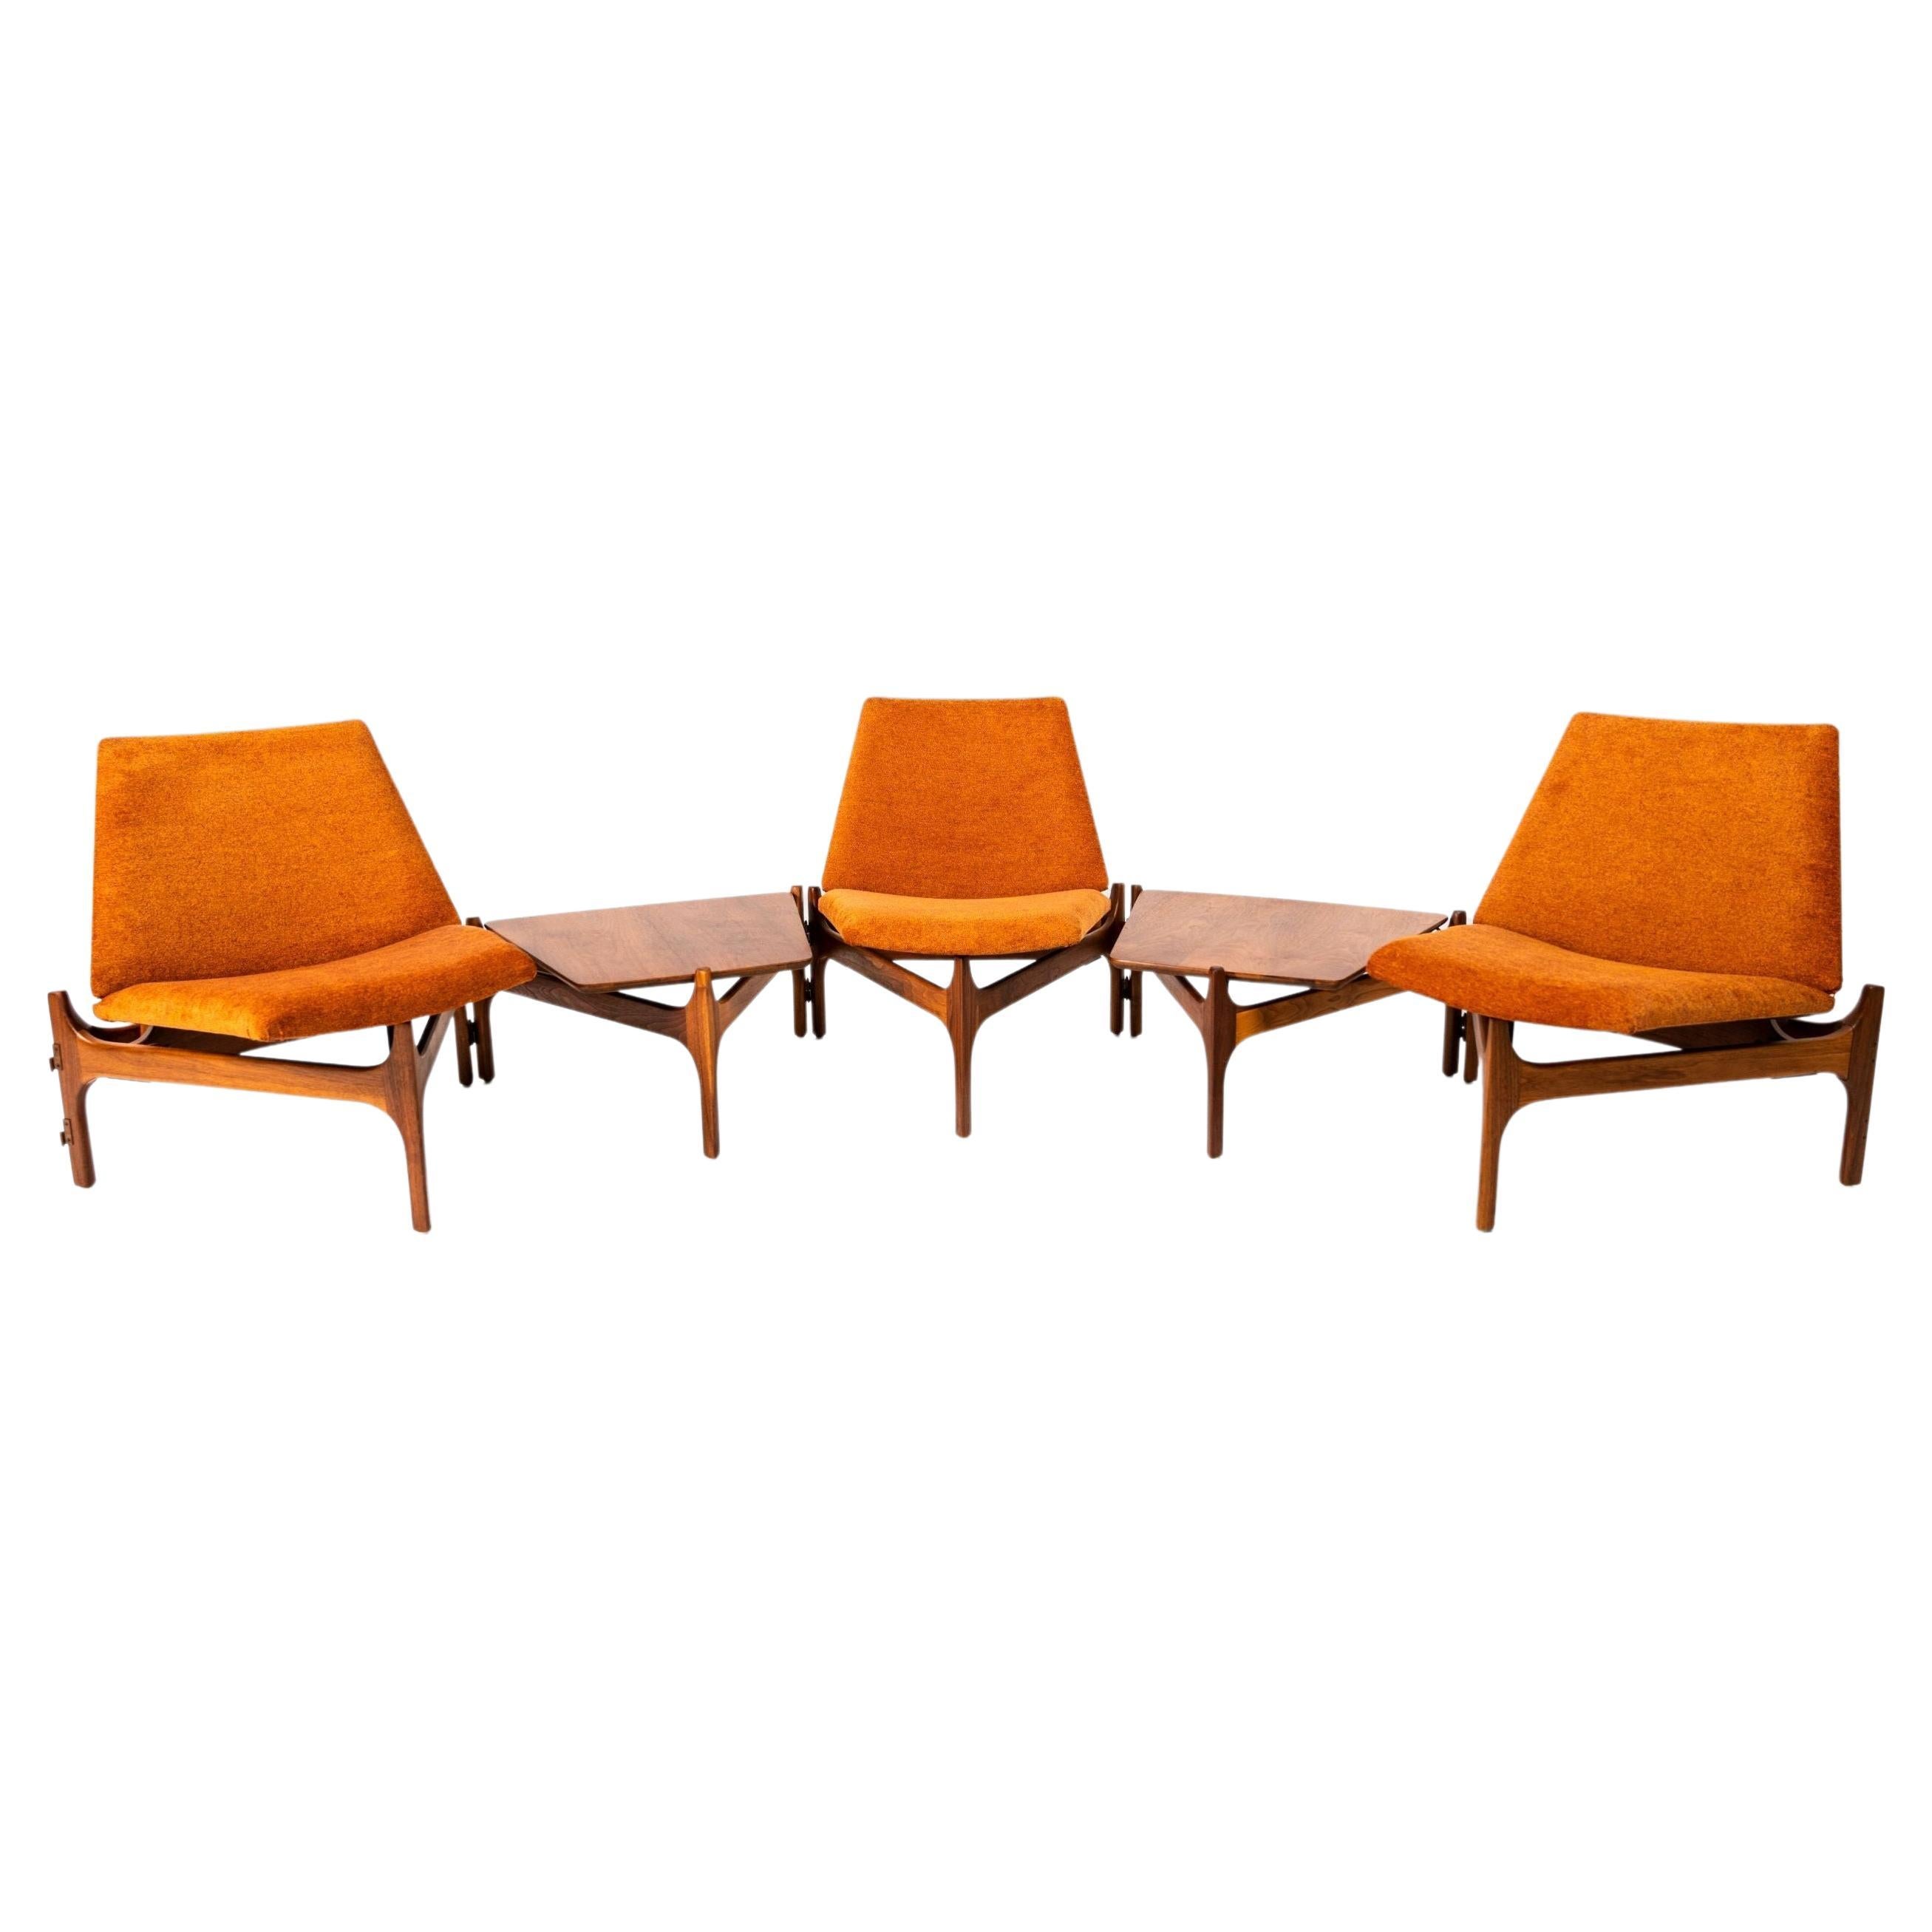 Modular 5-Piece Sectional of 3 Chairs and 2 Tables for Brown Saltman in Walnut